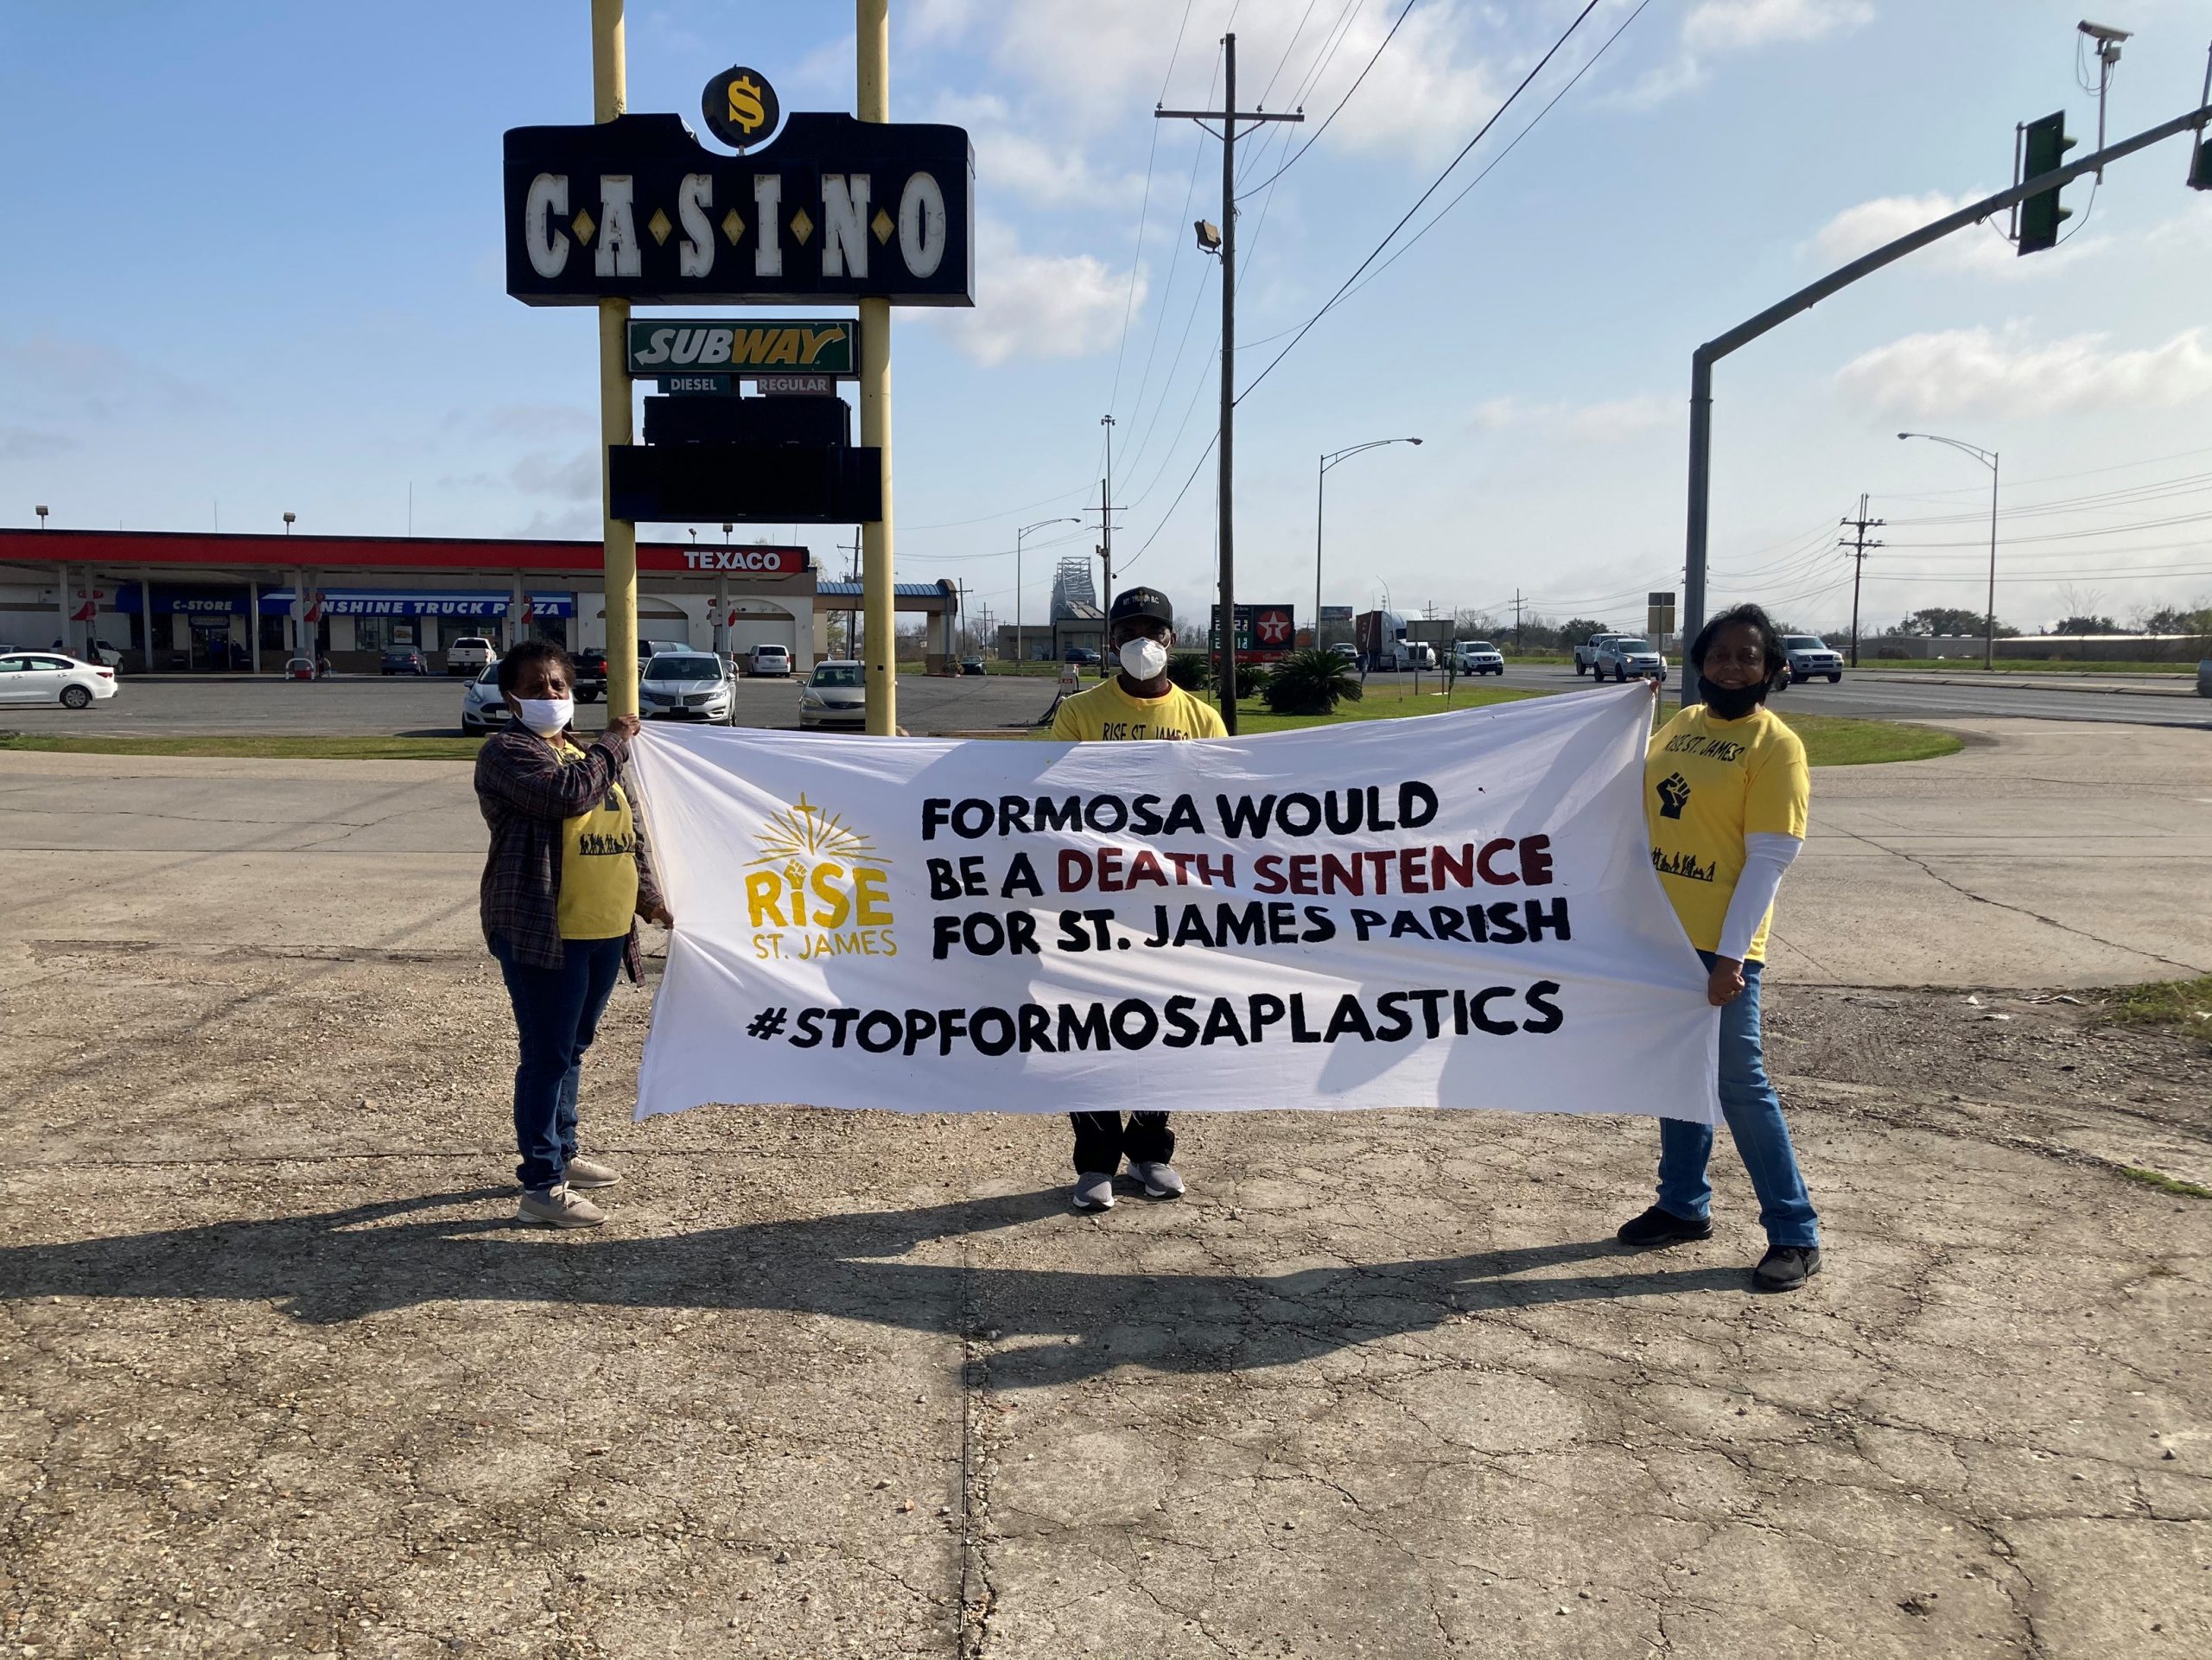 Formosa Would Be A Death Sentence For St. James Parish”: Activists Call Upon Biden and Army Corps to Stop Formosa Plastics